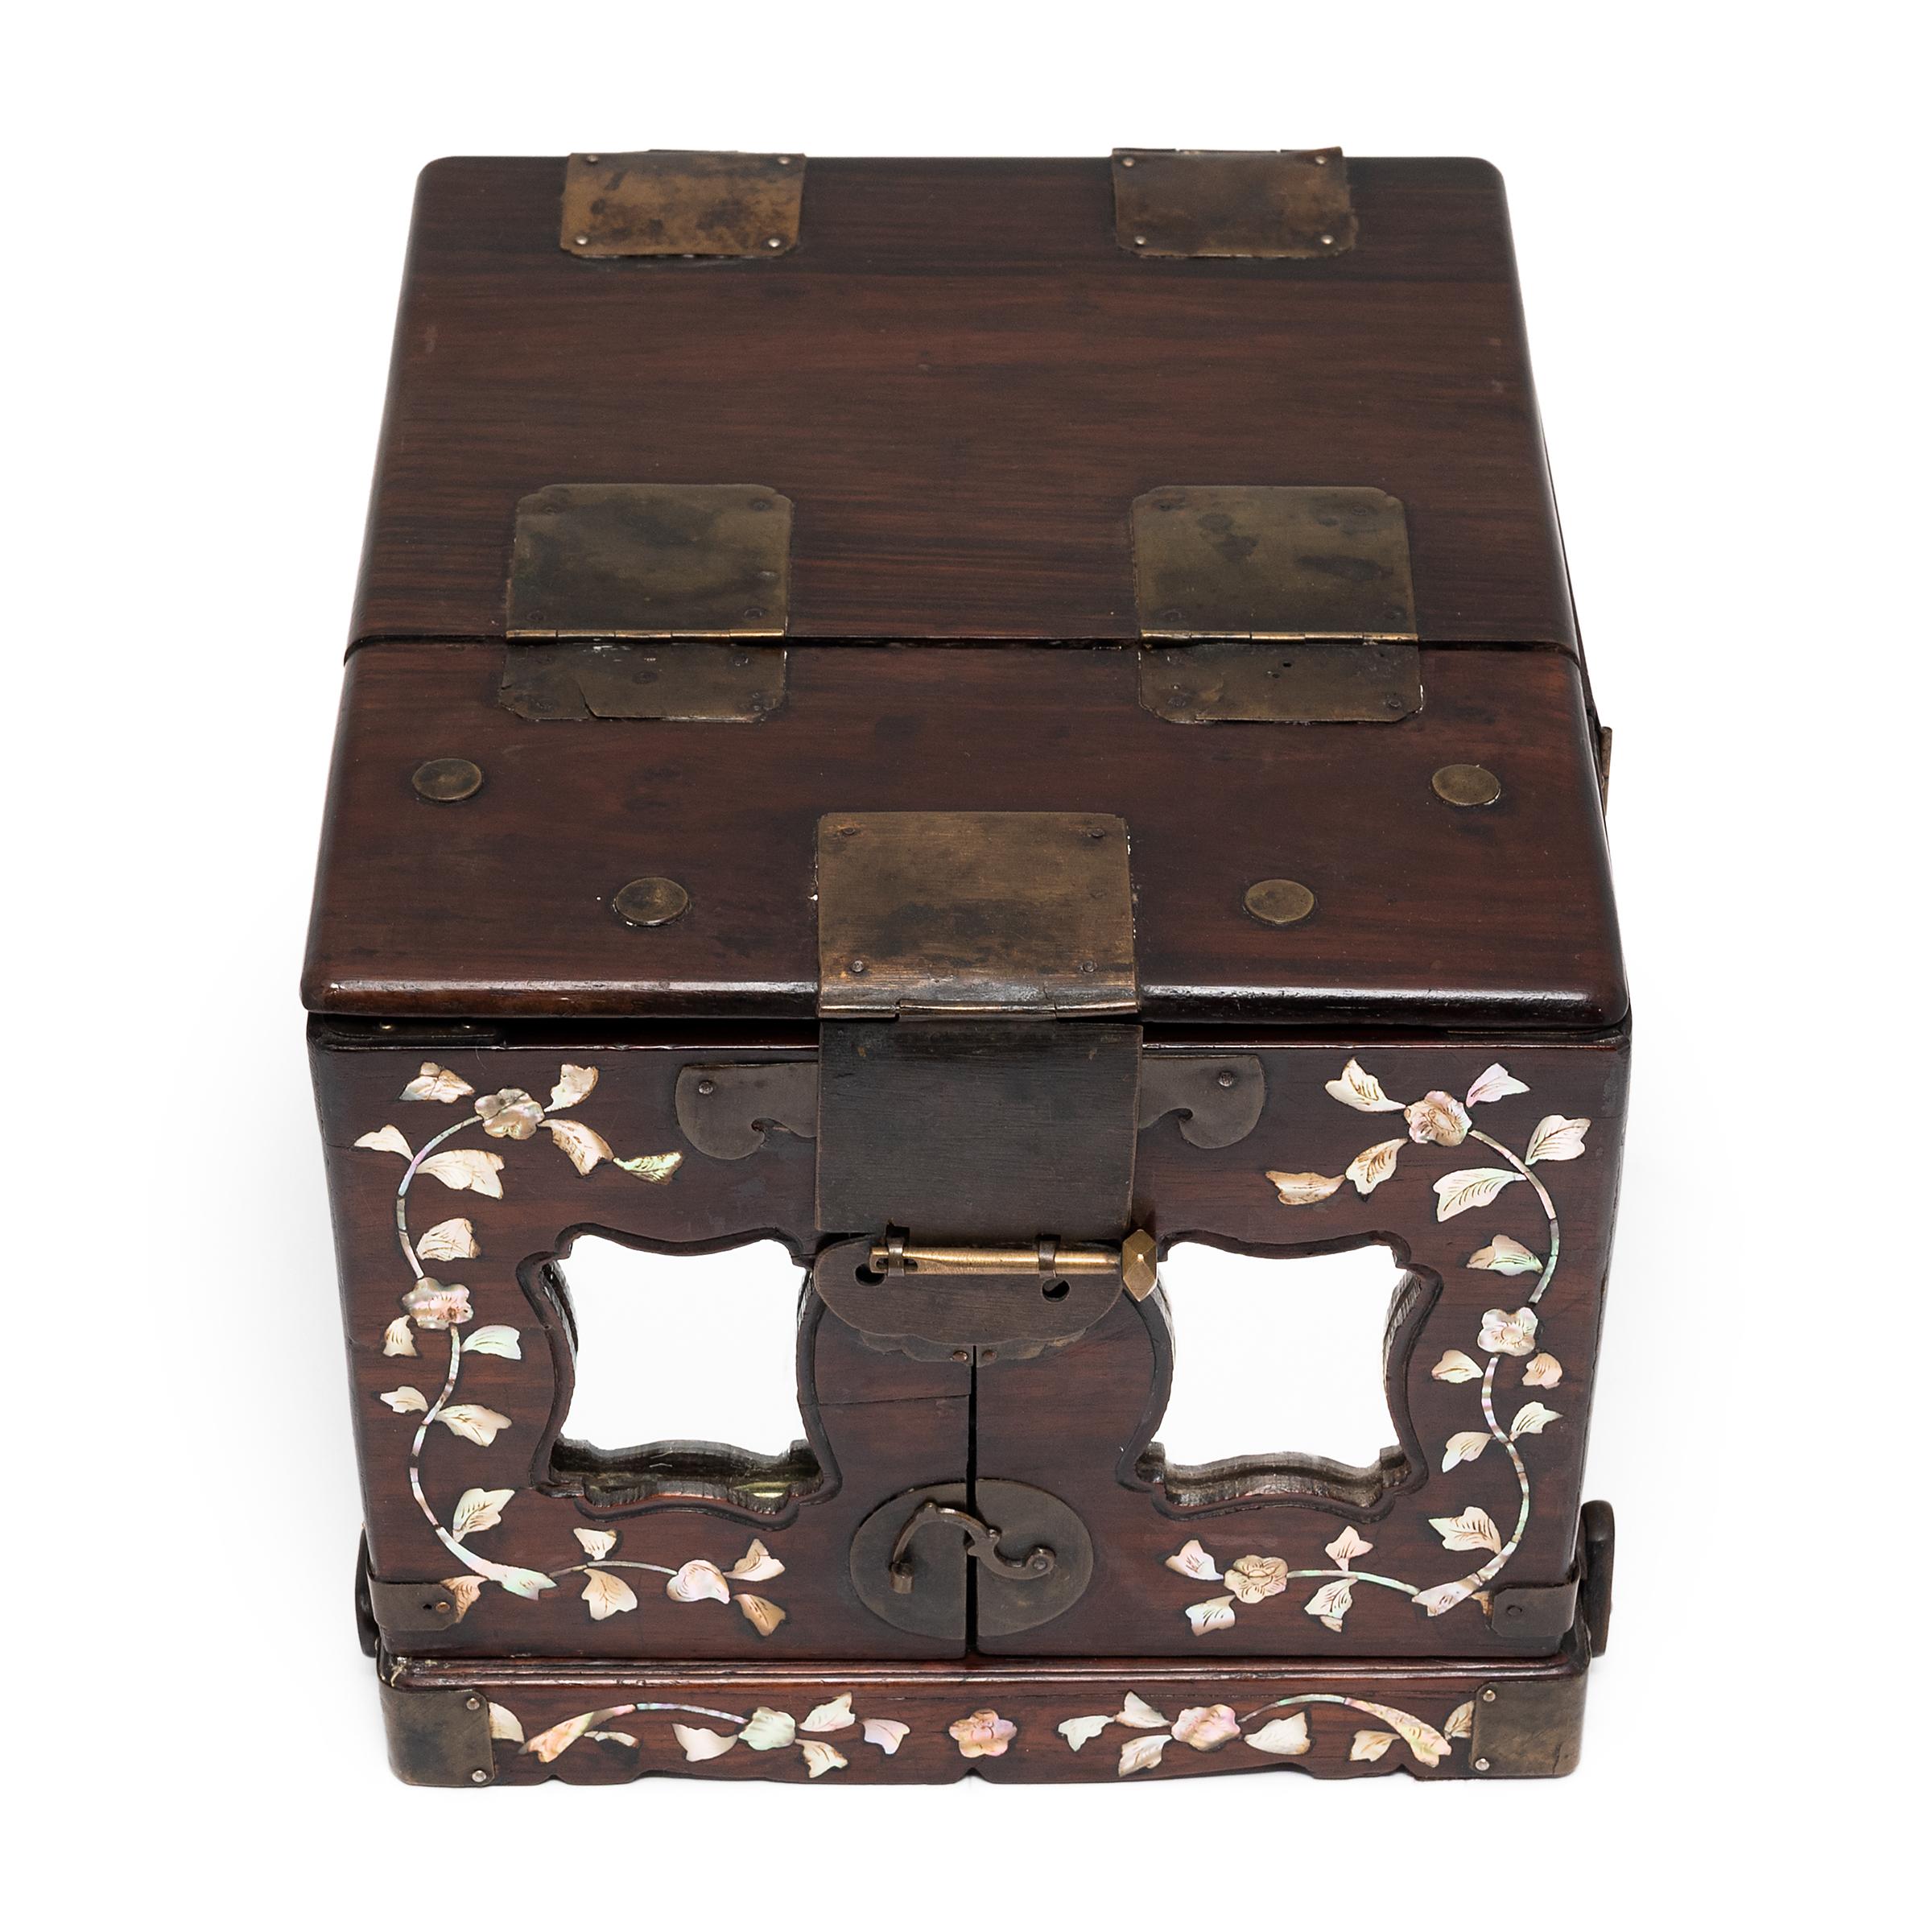 Long ago, this elegant rosewood box was used by a Qing-dynasty lady to store her favorite pieces of jewelry, each drawer filled with jades, pearls, coral necklaces, and hair pins. The front is adorned with delicate floral mother-of-pearl inlay and